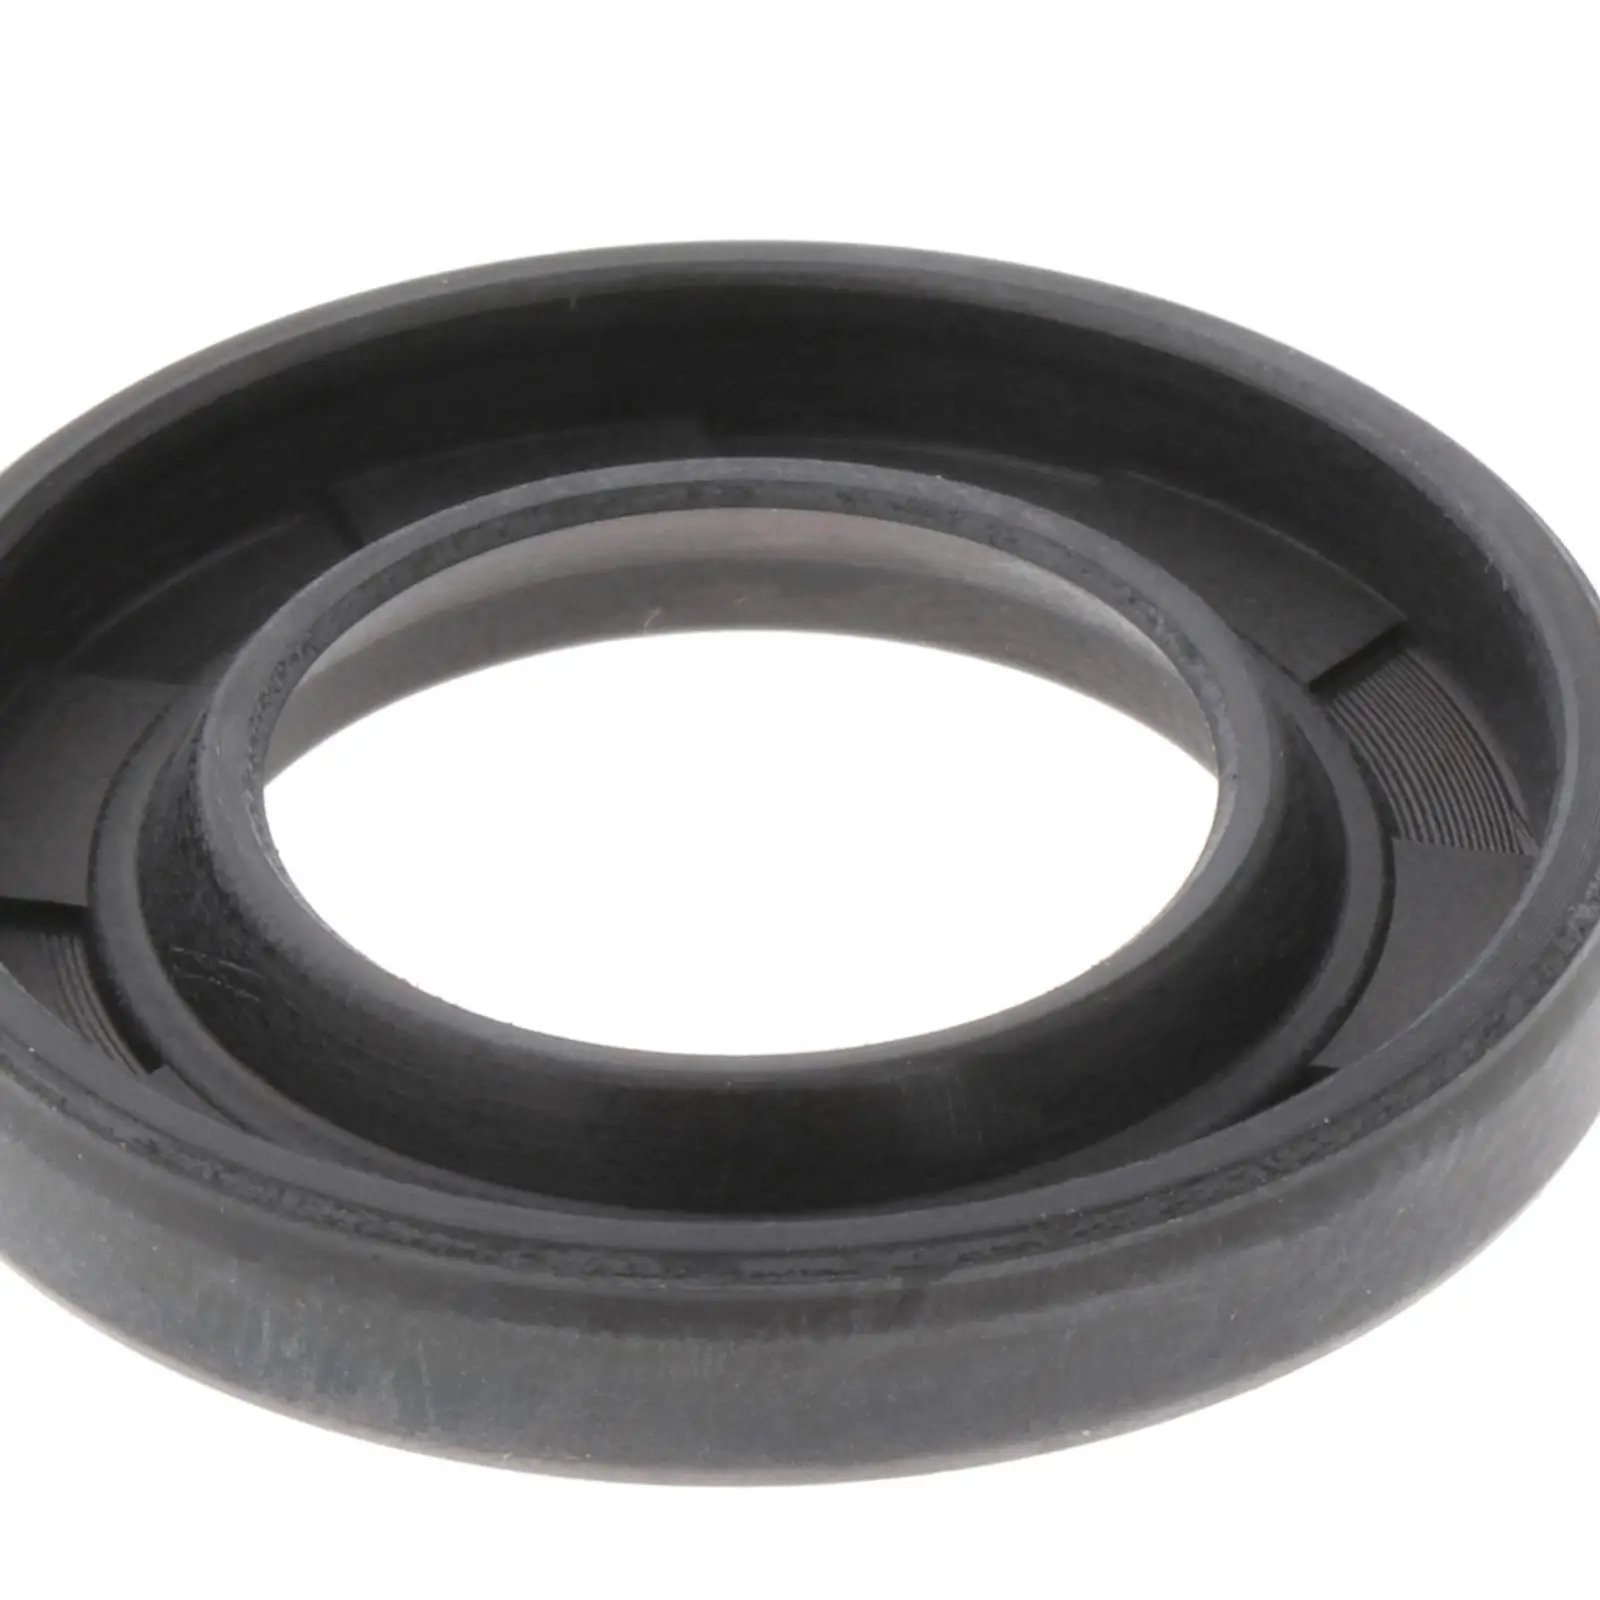 Oil Seal Fit for  Outboard Motor 60HP 70HP Outboard Engine 2T 3cyl